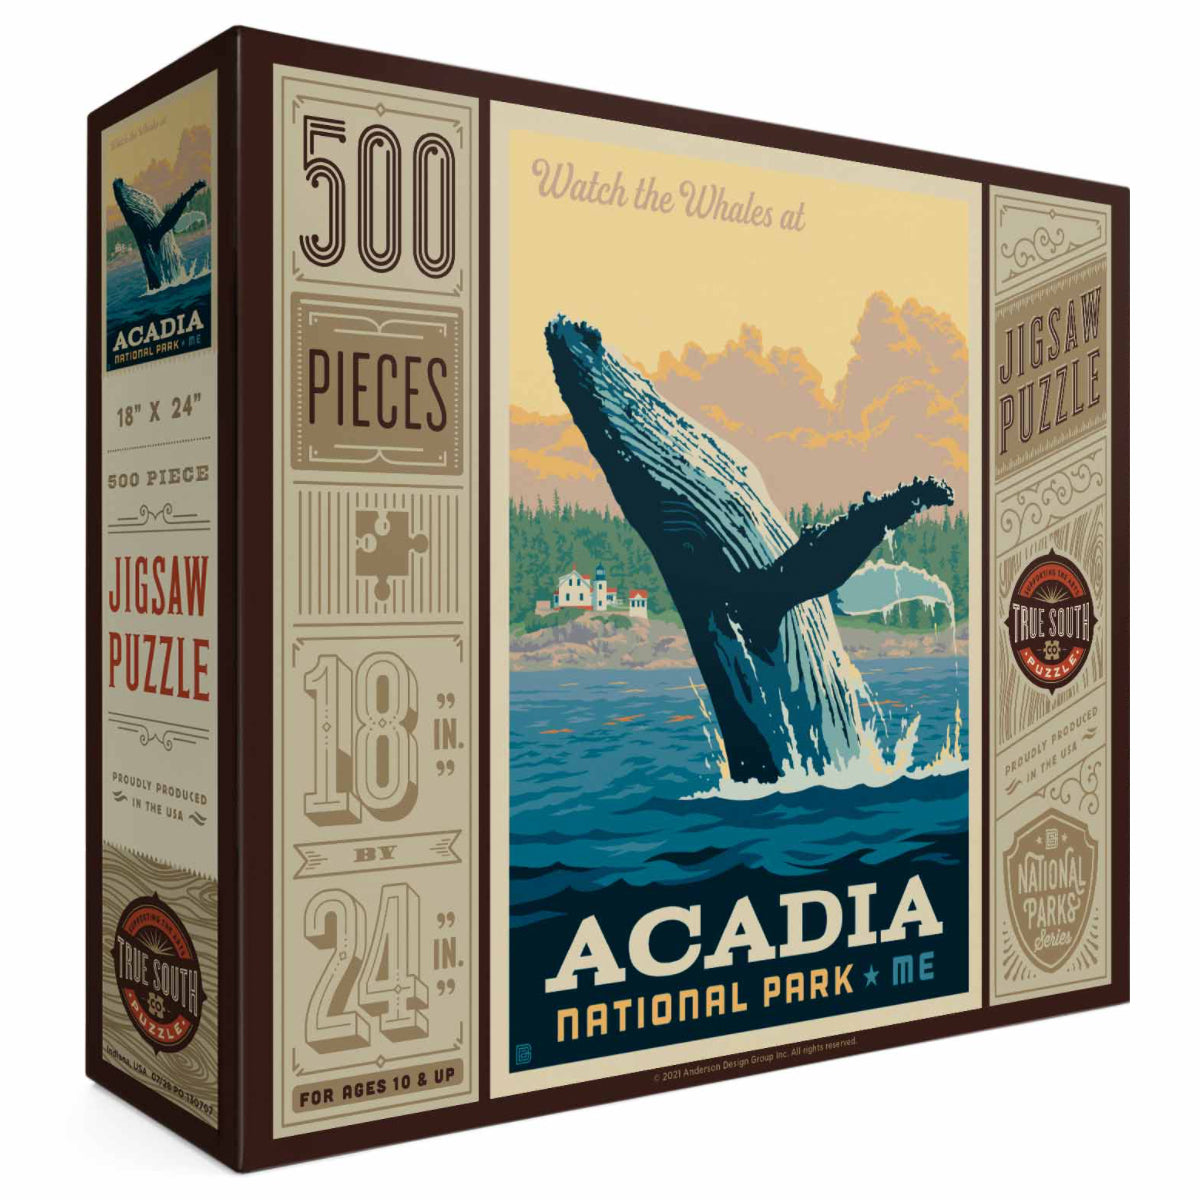 500-Pc. Puzzle: Acadia National Park (Whale Watching)